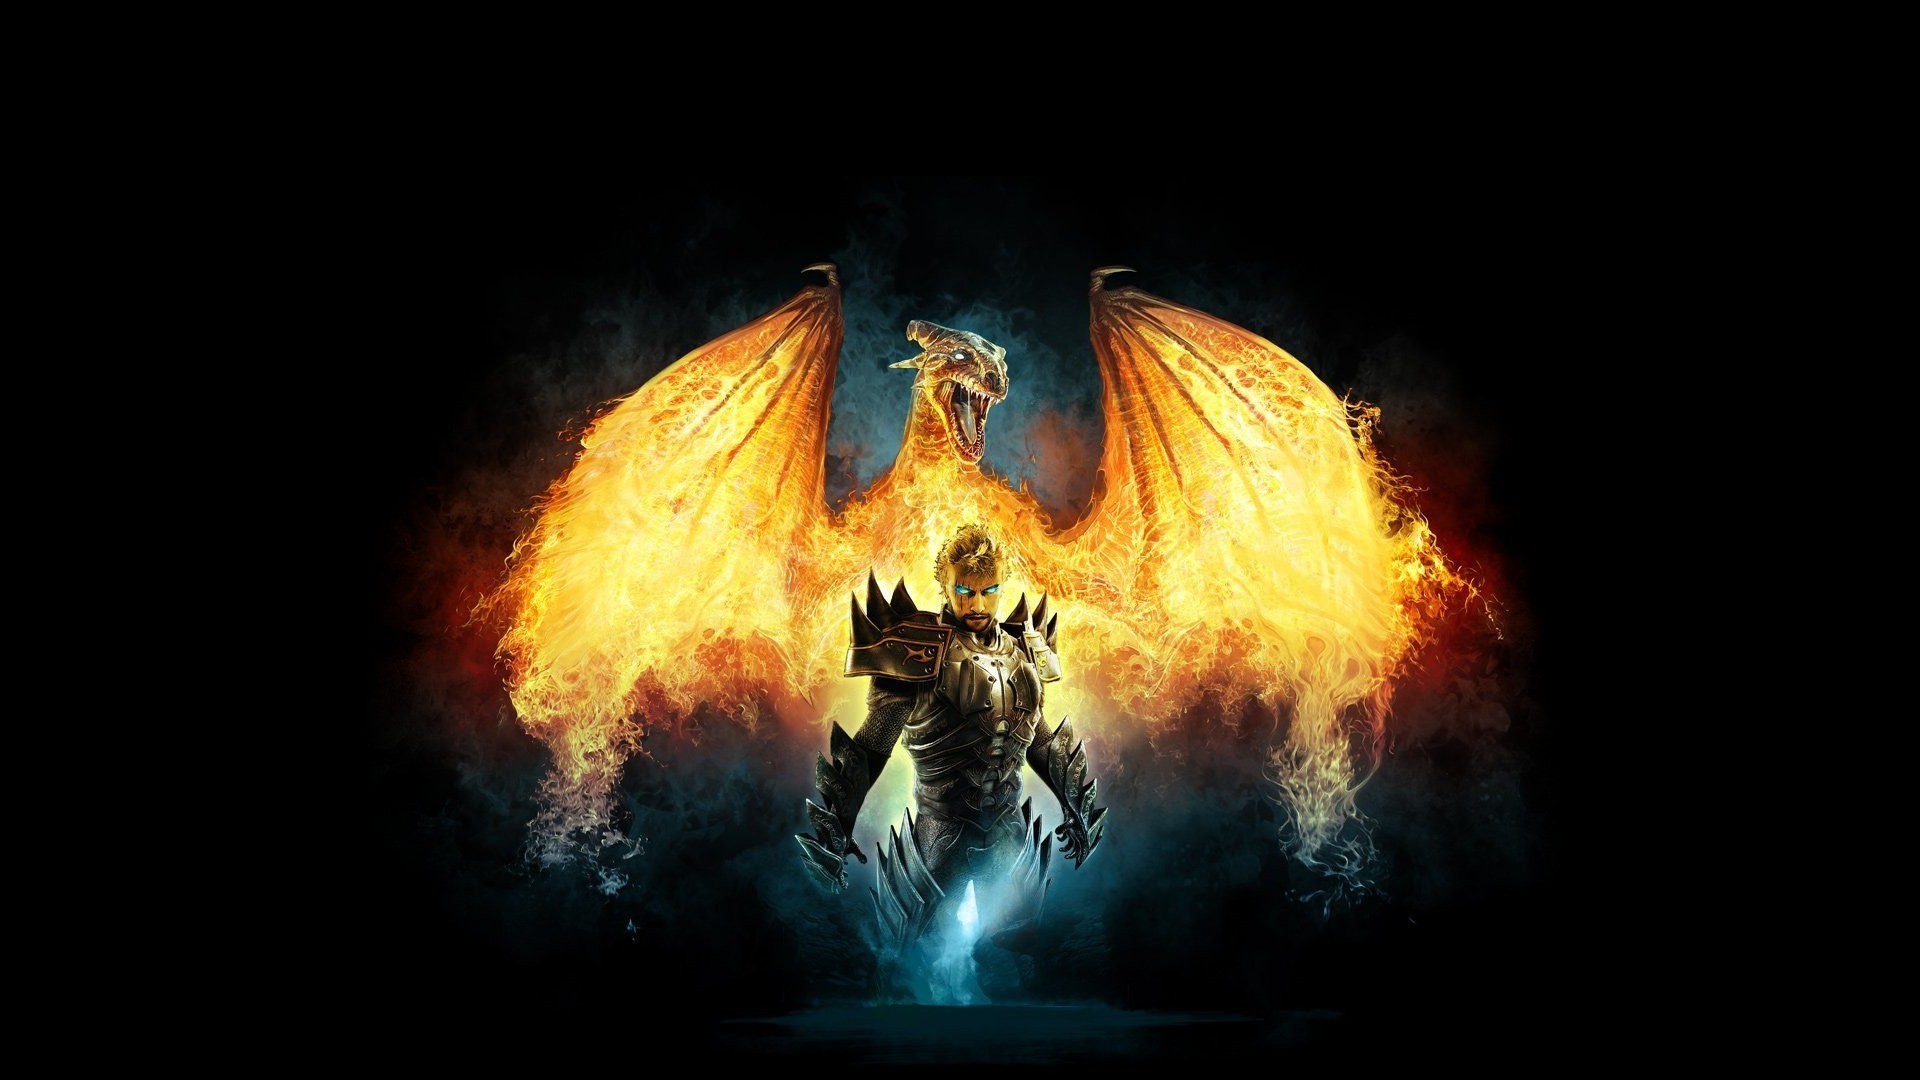 Mobile wallpaper: Fire, Dragons, Fantasy, 15119 download the picture for free